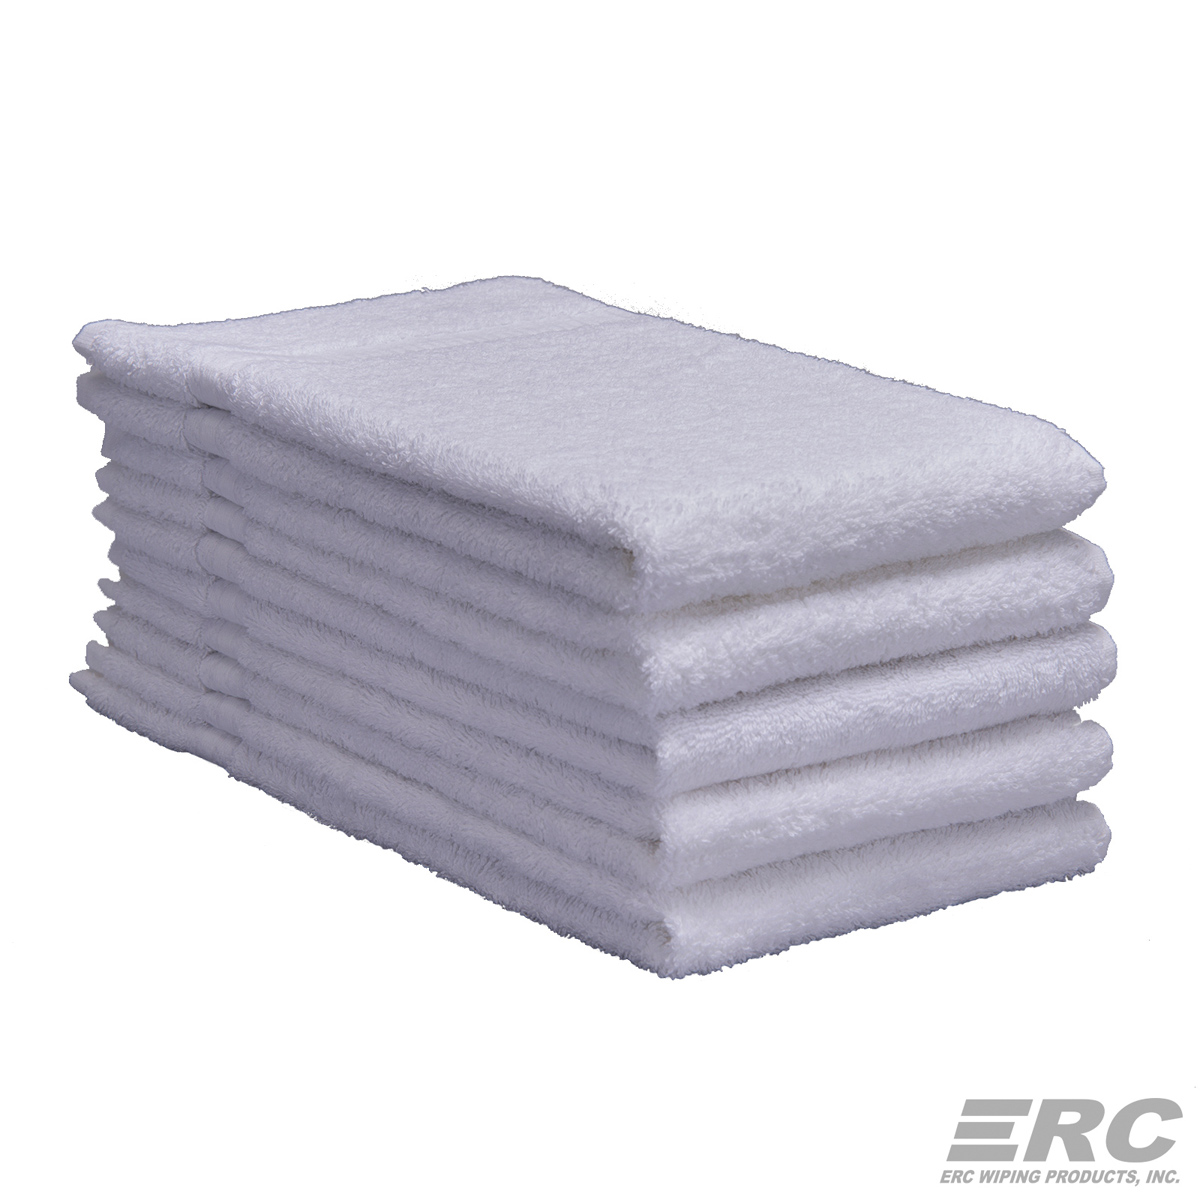 Cotton Terry Bar Towels 14x16 Heavyweight White